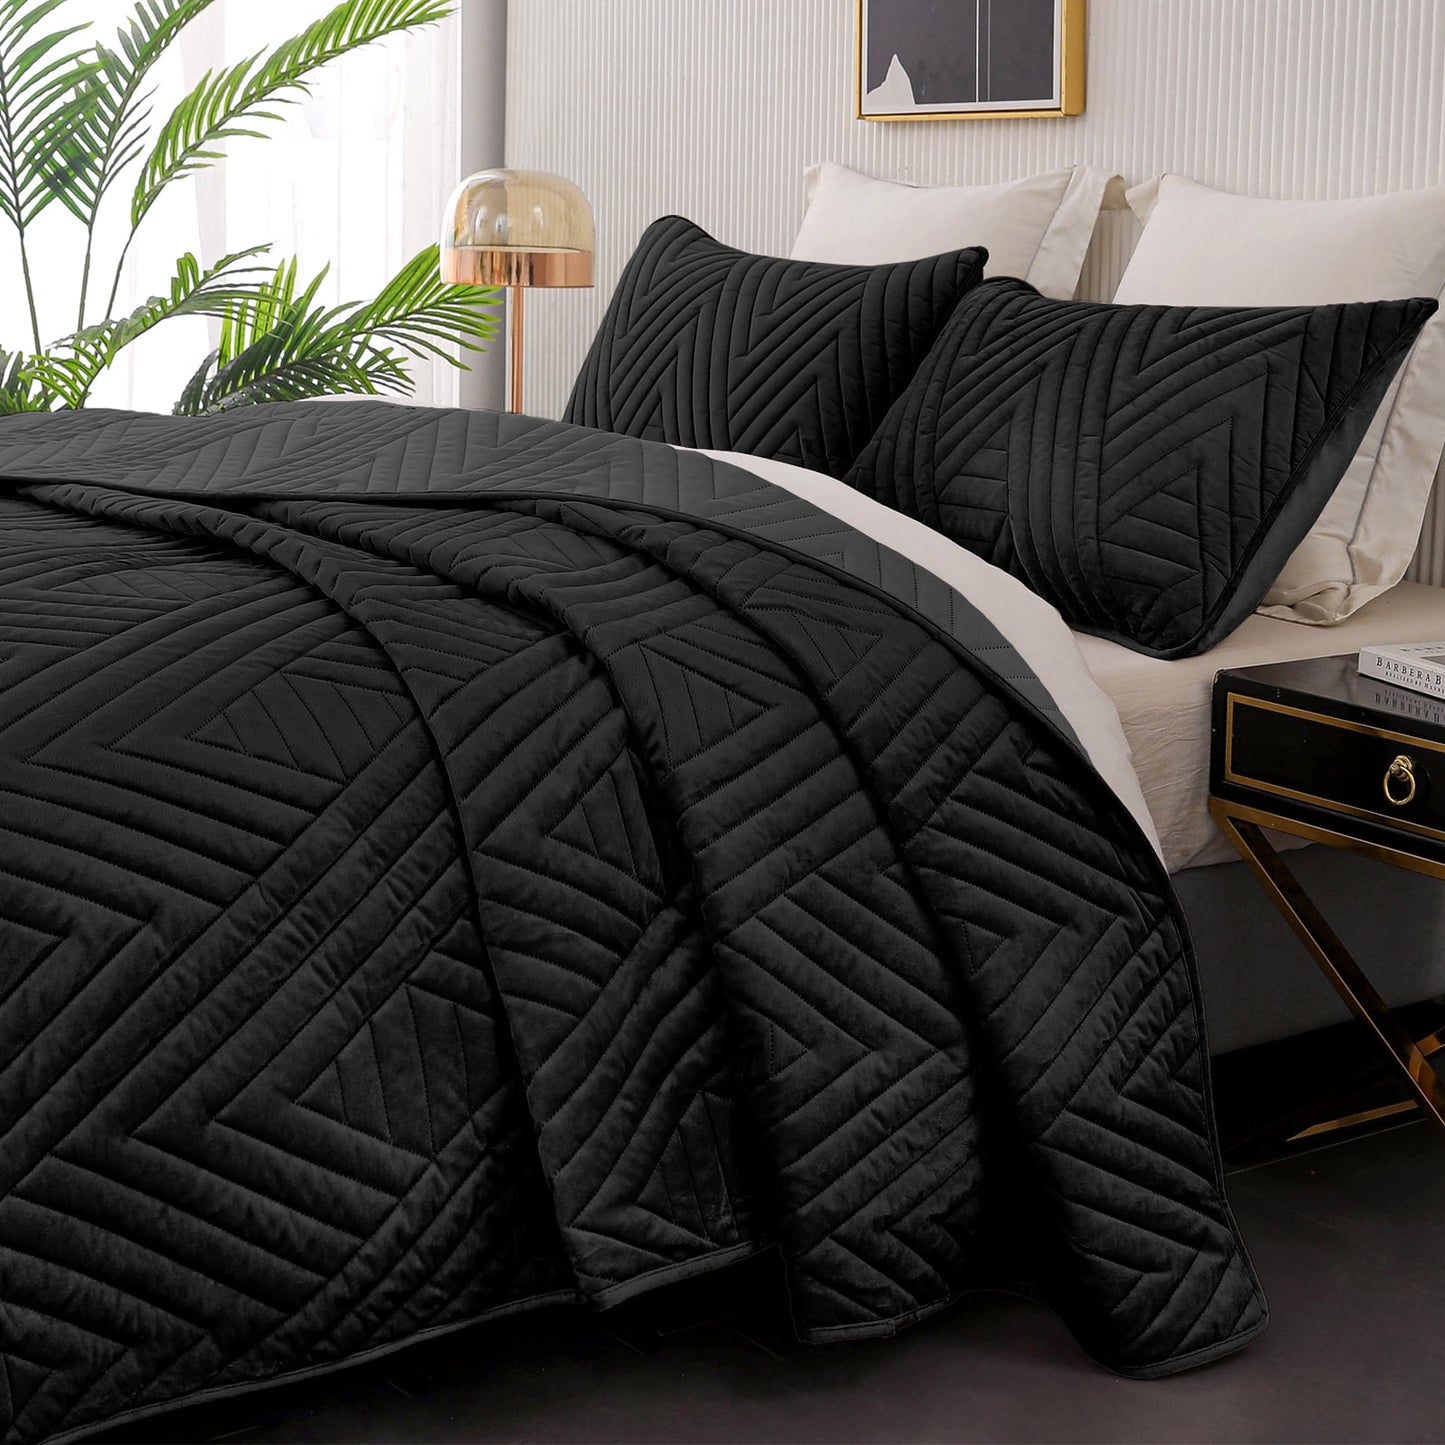 Exclusivo Mezcla Super Plush Velvet Quilts Queen Size with Pillow Shams, Luxury Soft Reversible 3 Piece Bedspreads Coverlet Comforter set for all seasons, Lightweight and Warm, Black